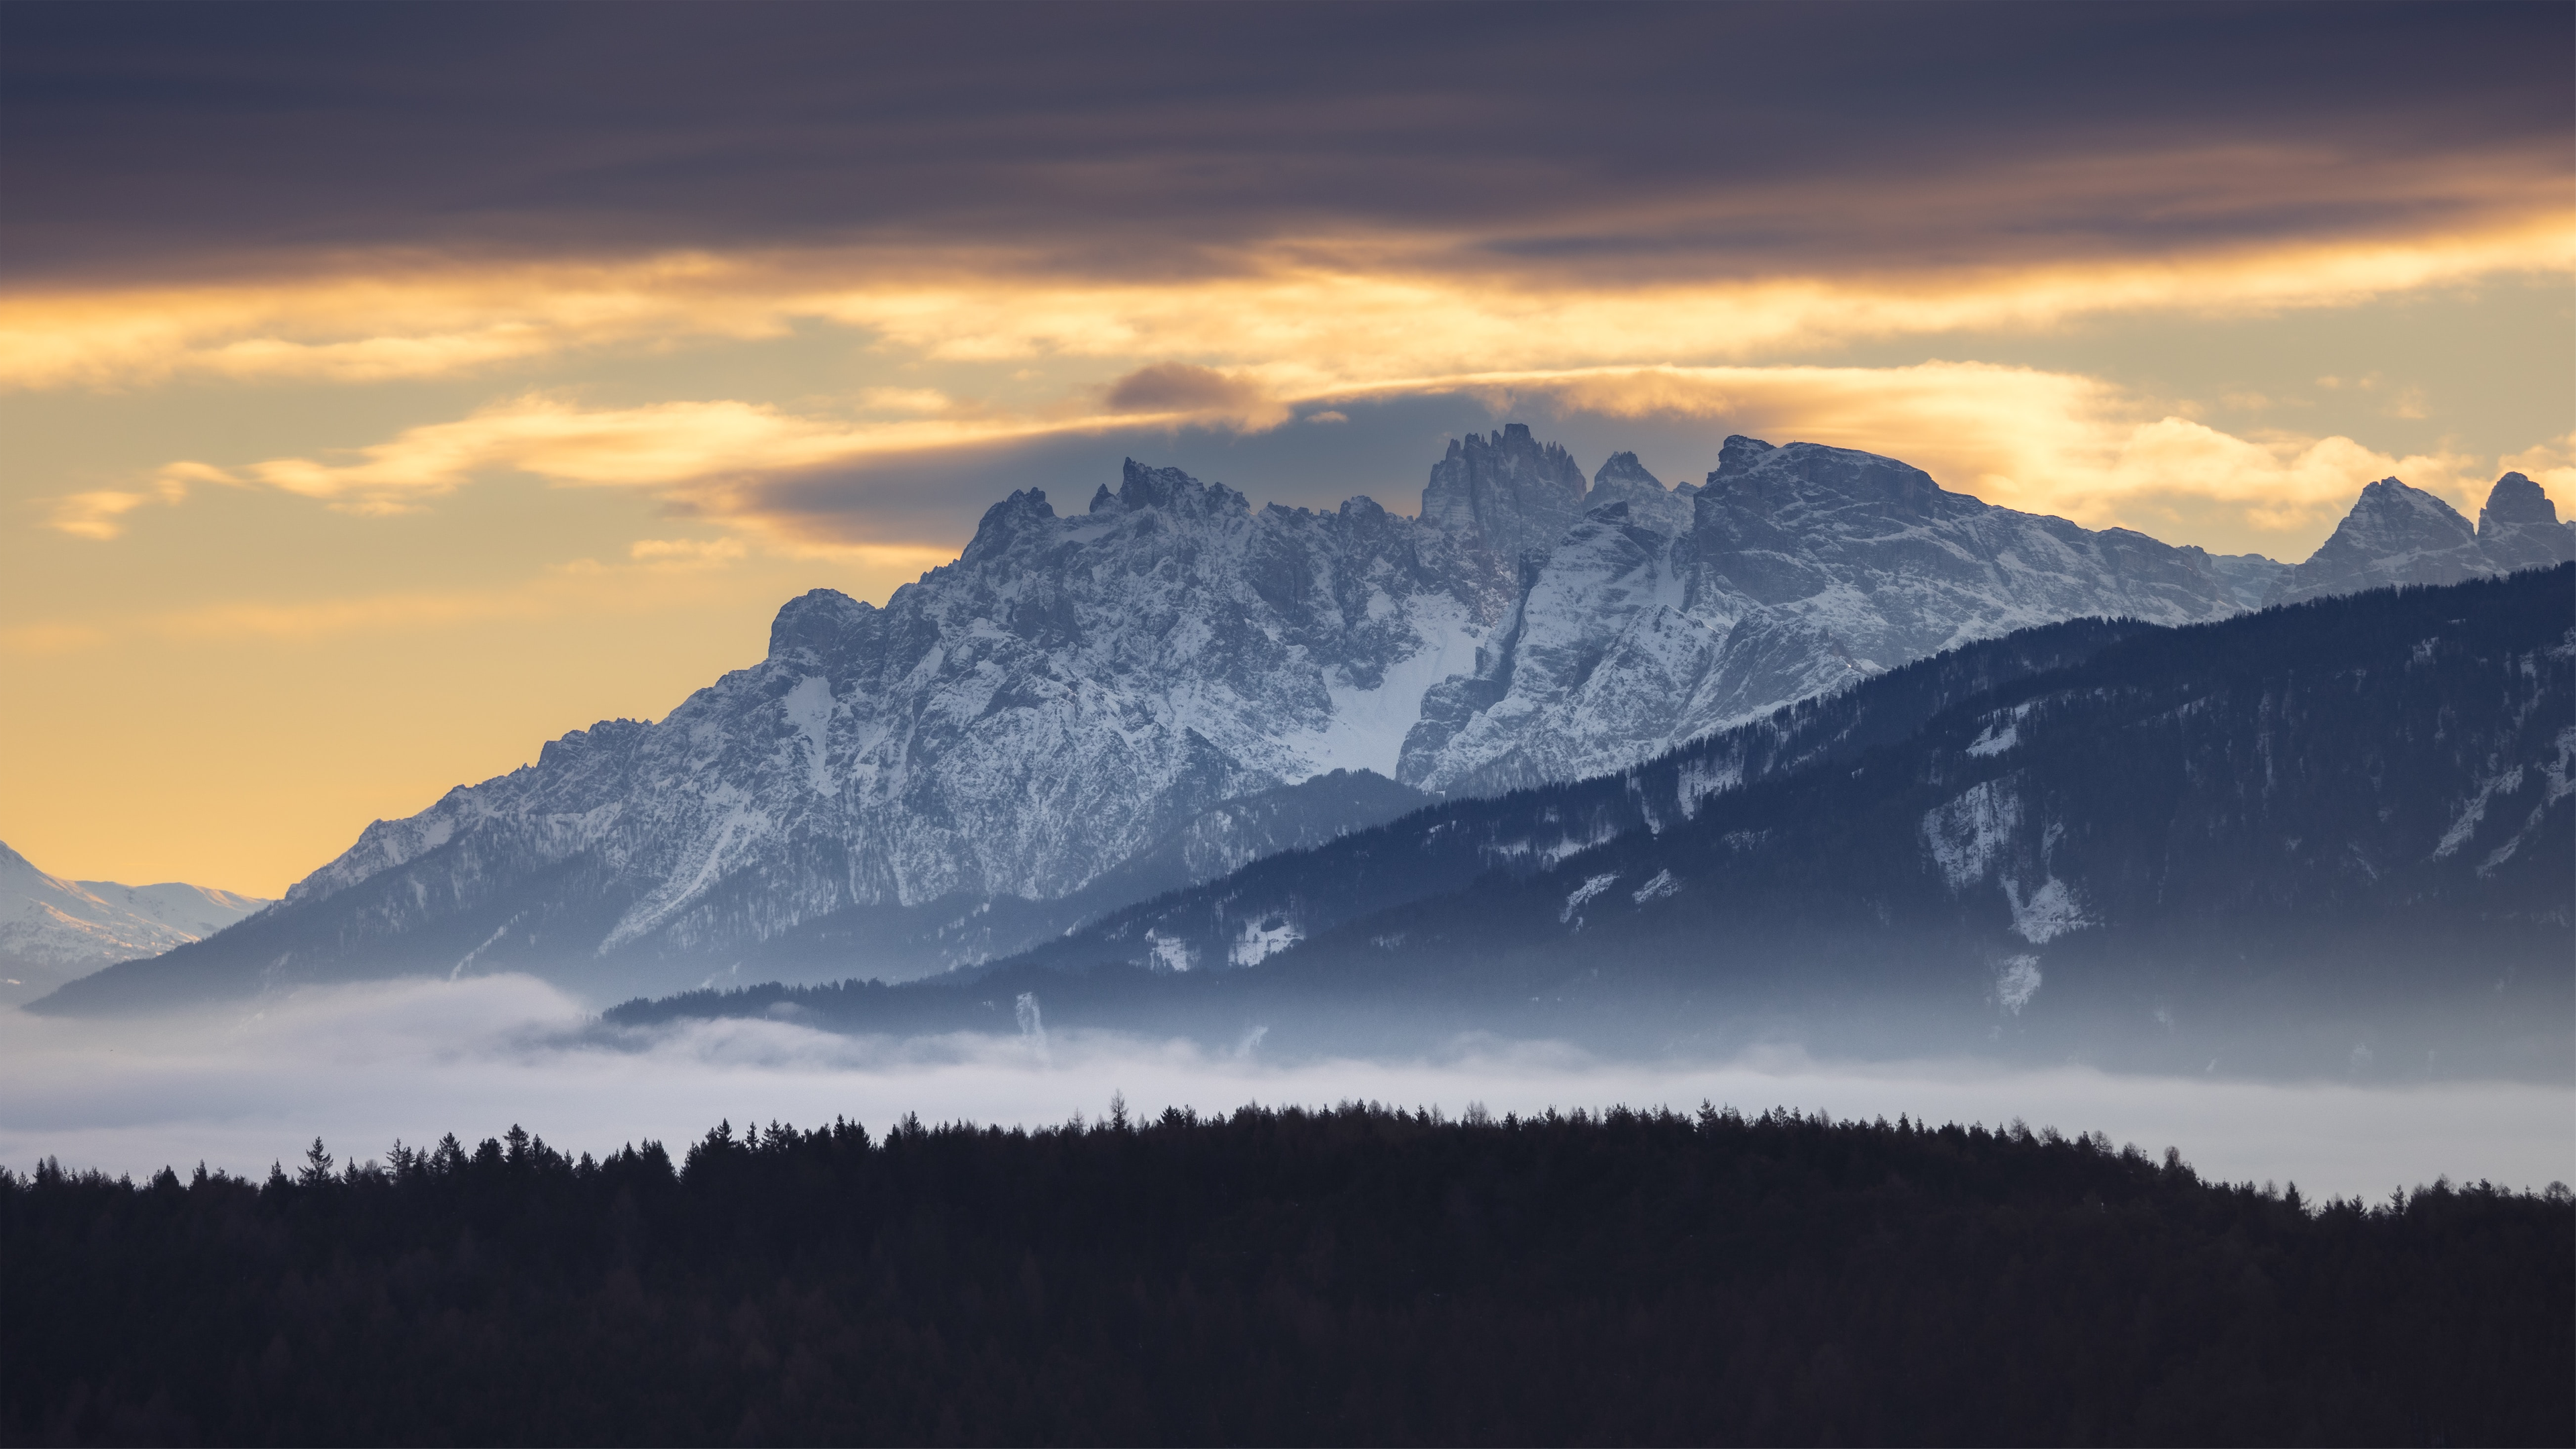 General 3840x2160 photography landscape sunset mountains snow clouds nature forest sky